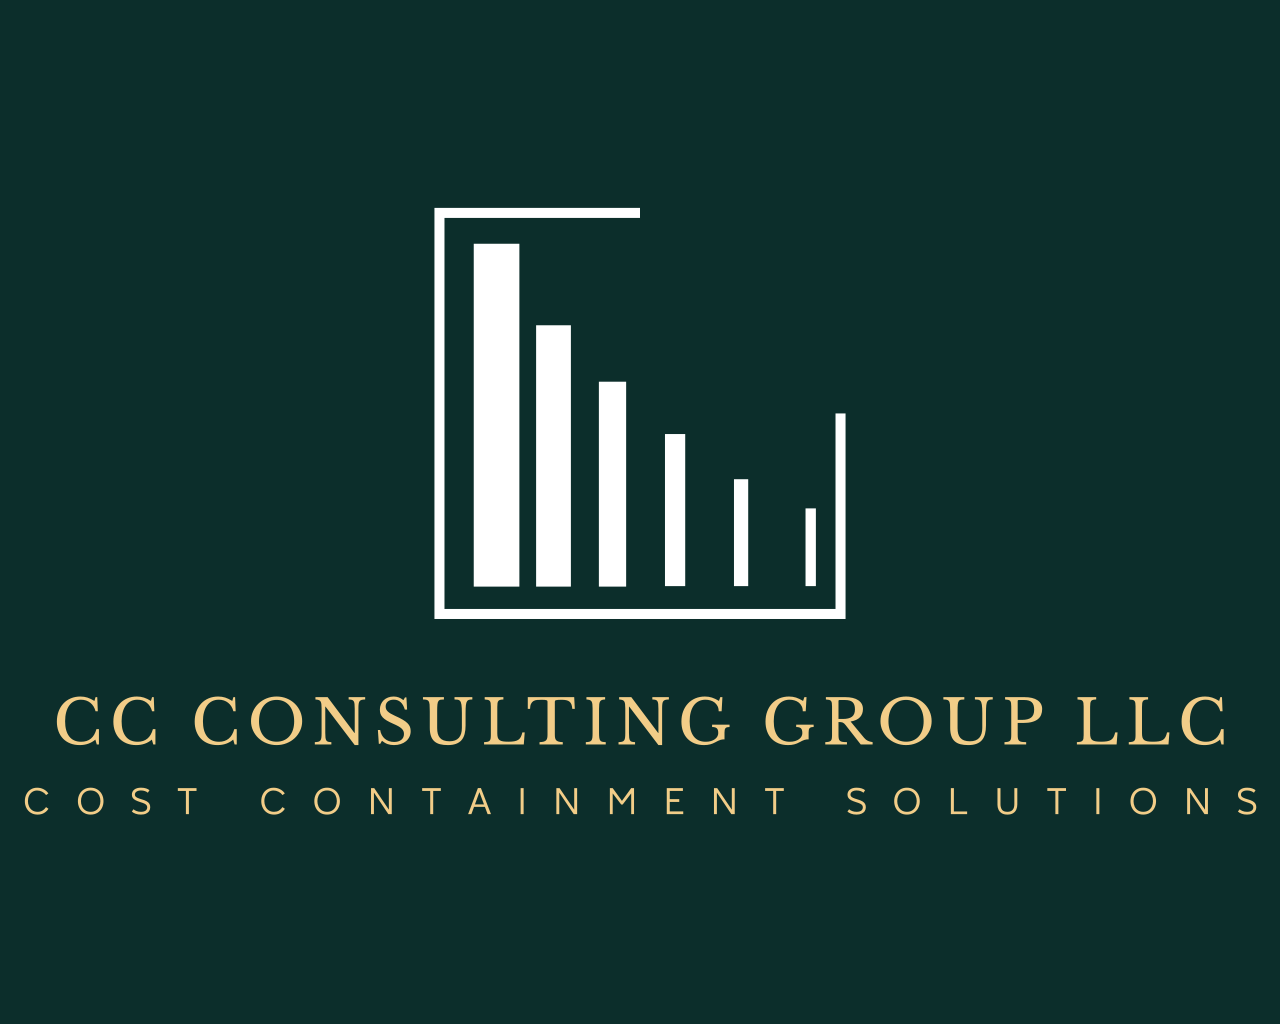 CC Consulting Group LLC